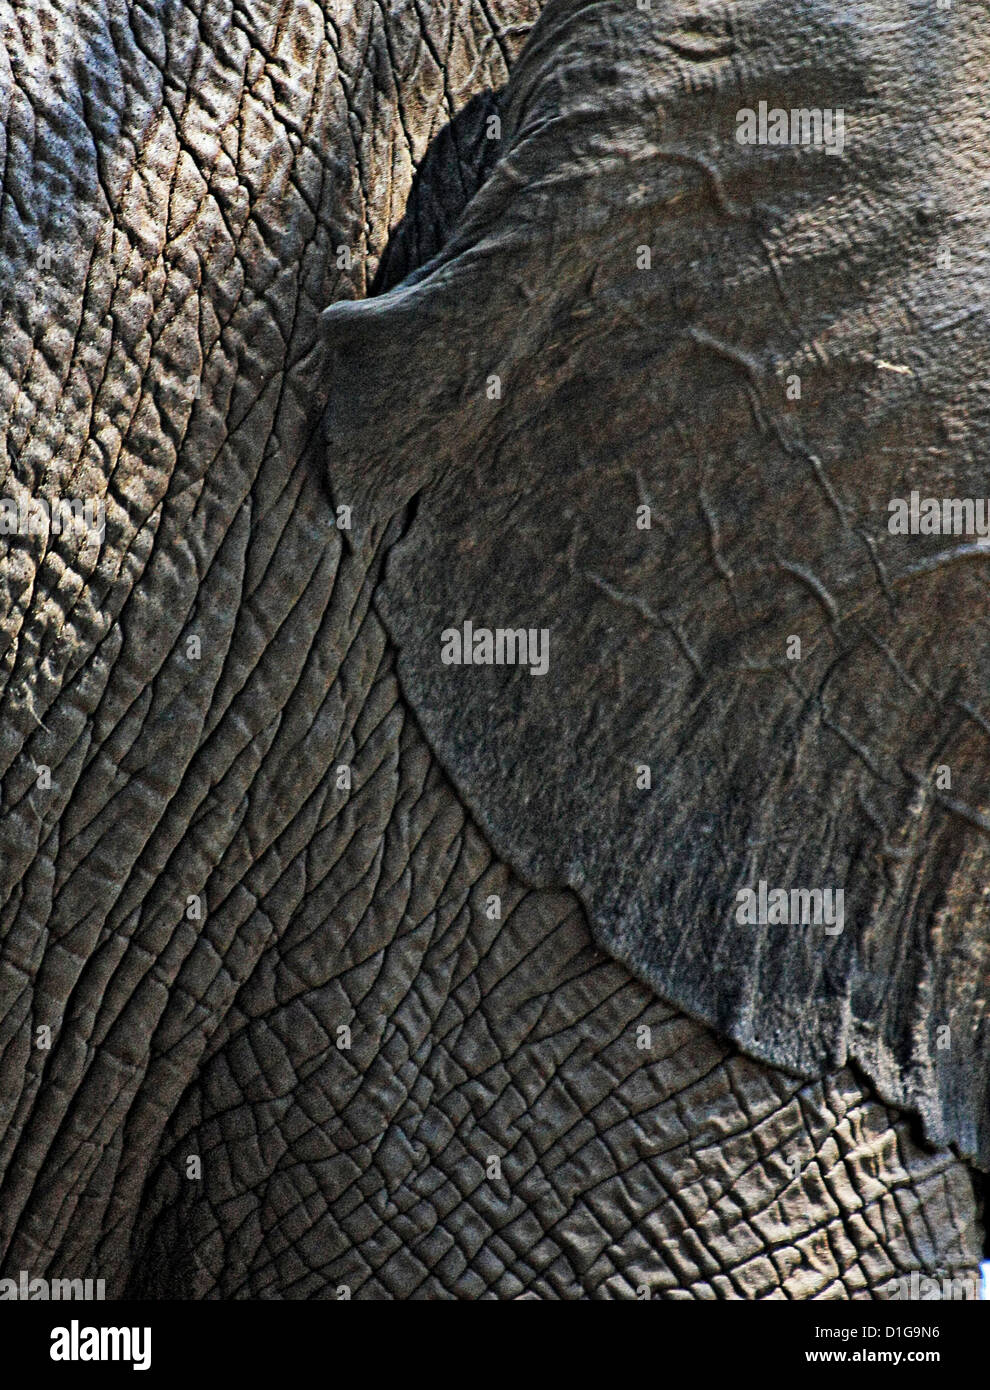 Close-up of an elephant's wrinkled ear and skin Stock Photo